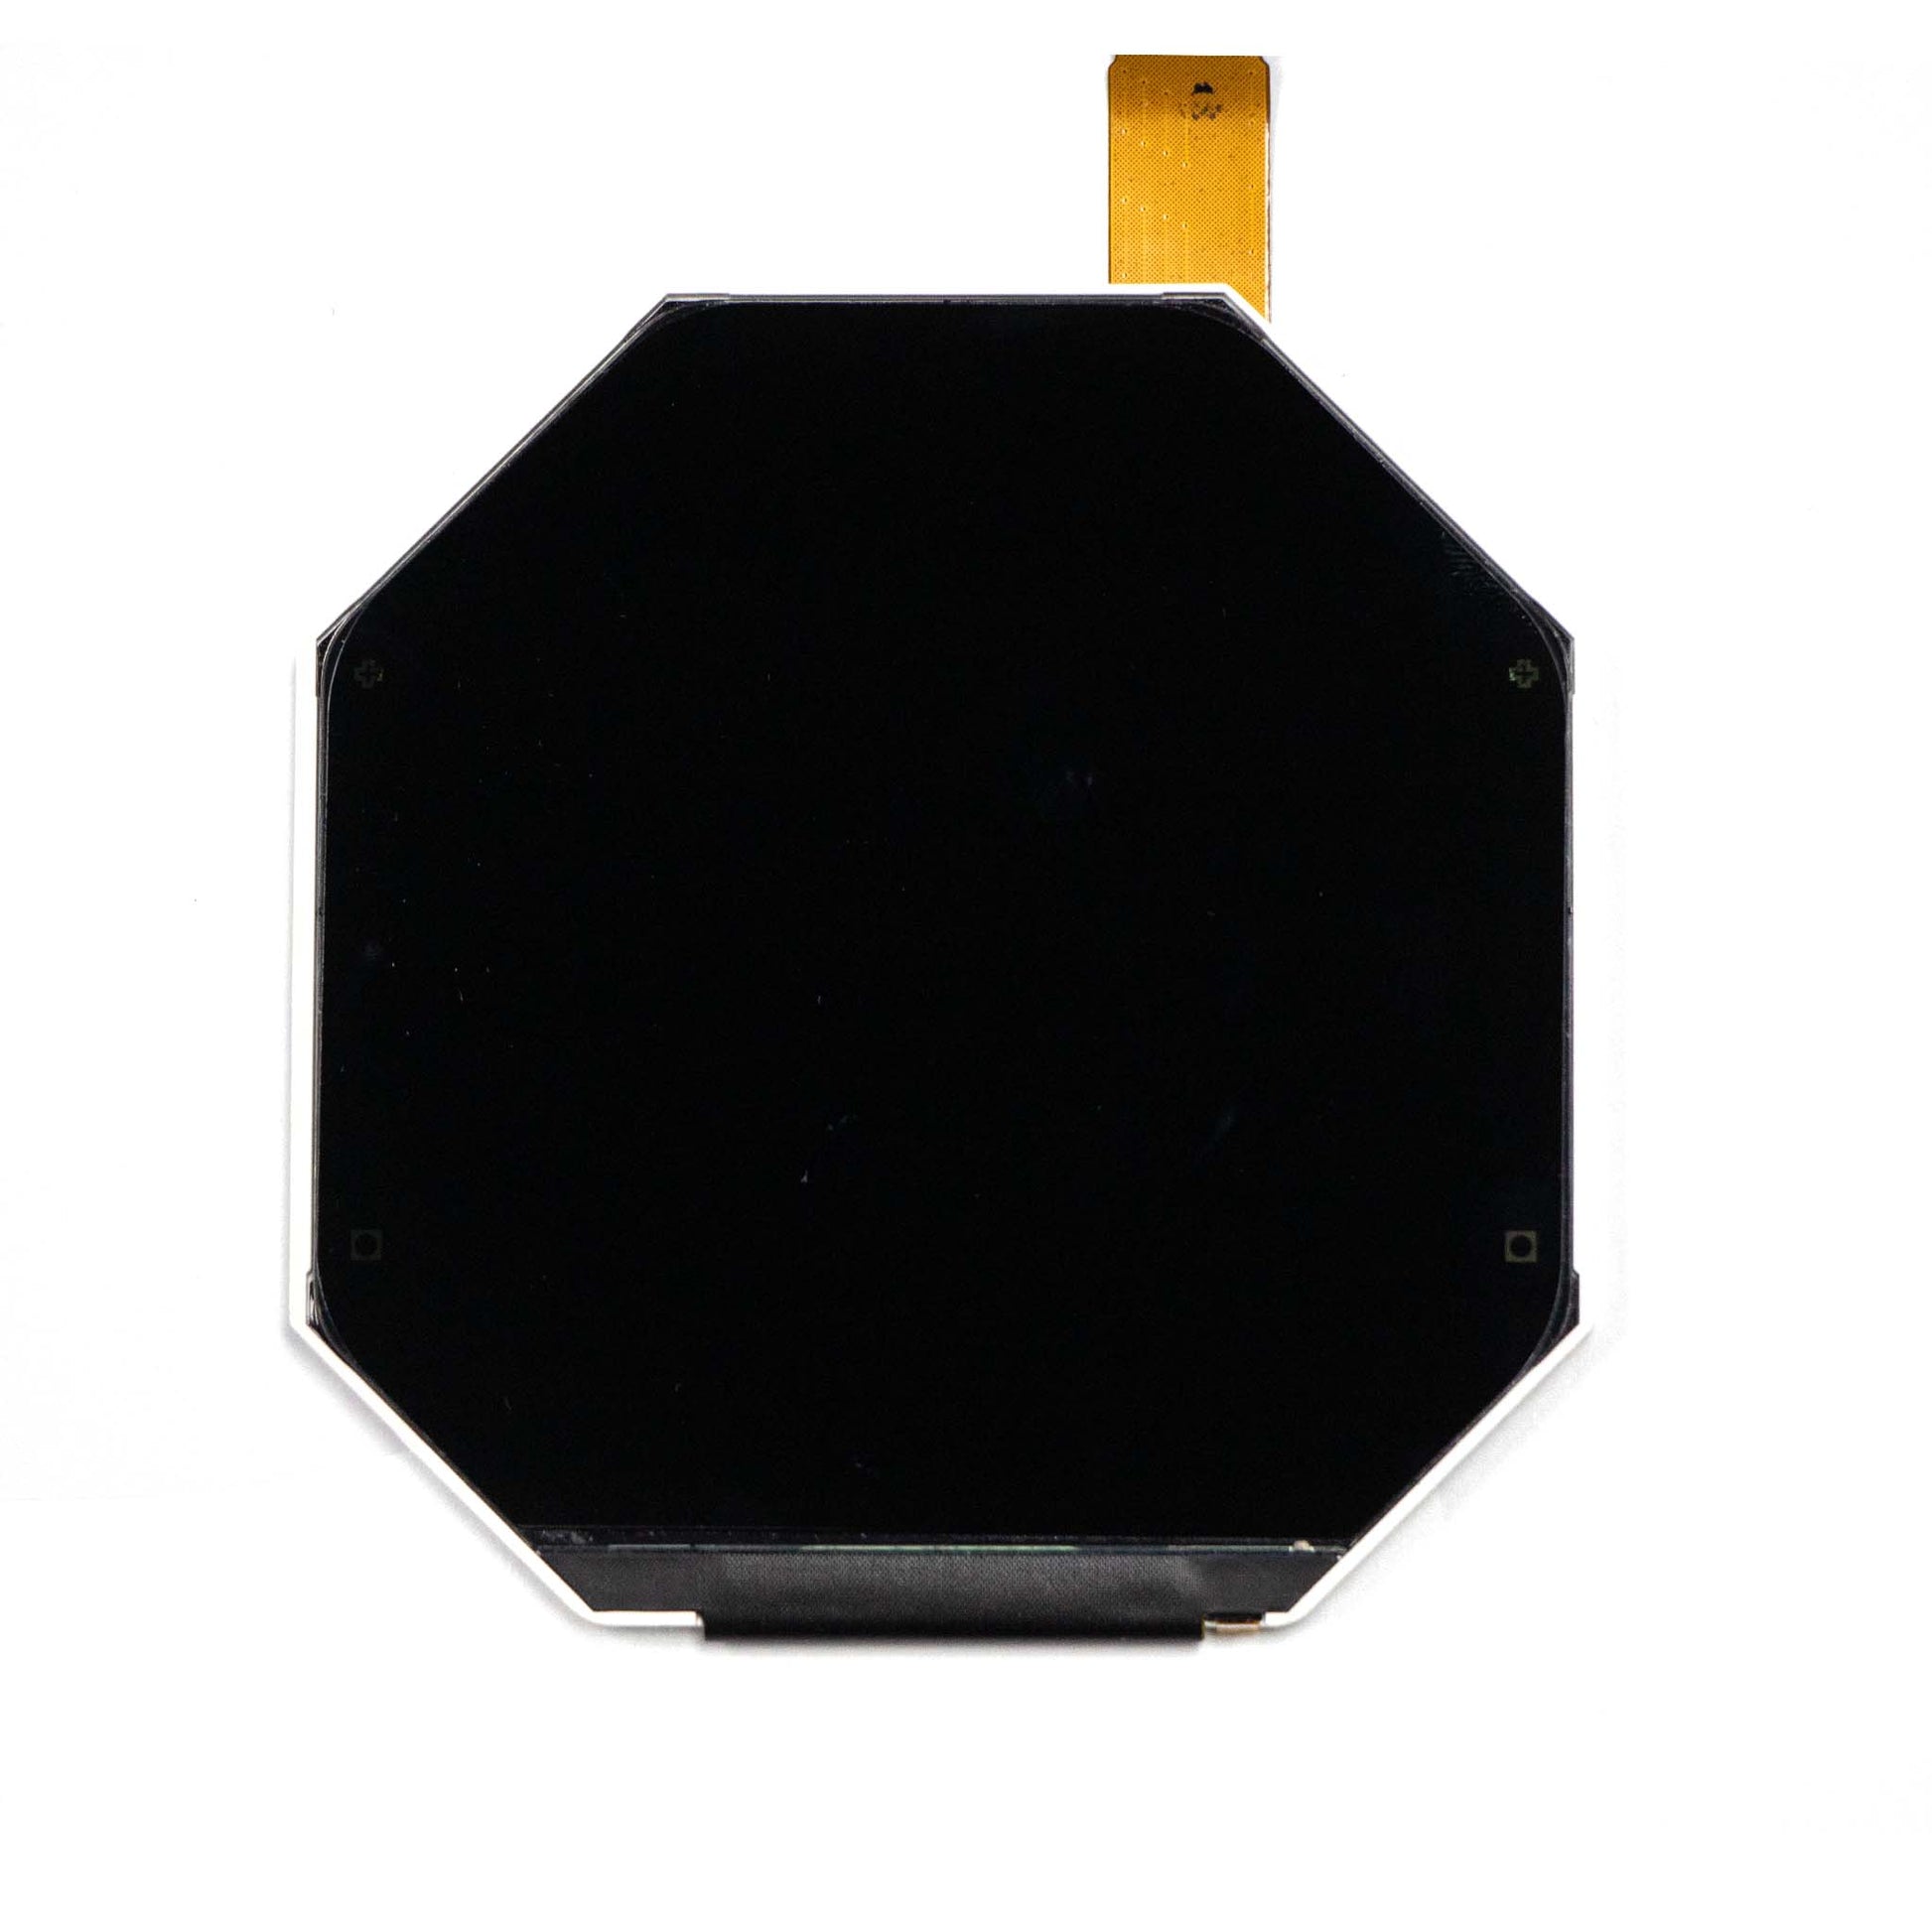 2.47 inch Round IPS Display Panel with 480x480 resolution in an octagonal shape, unrestricted viewing from Up/Down/Left/Right, utilizing MIPI interface